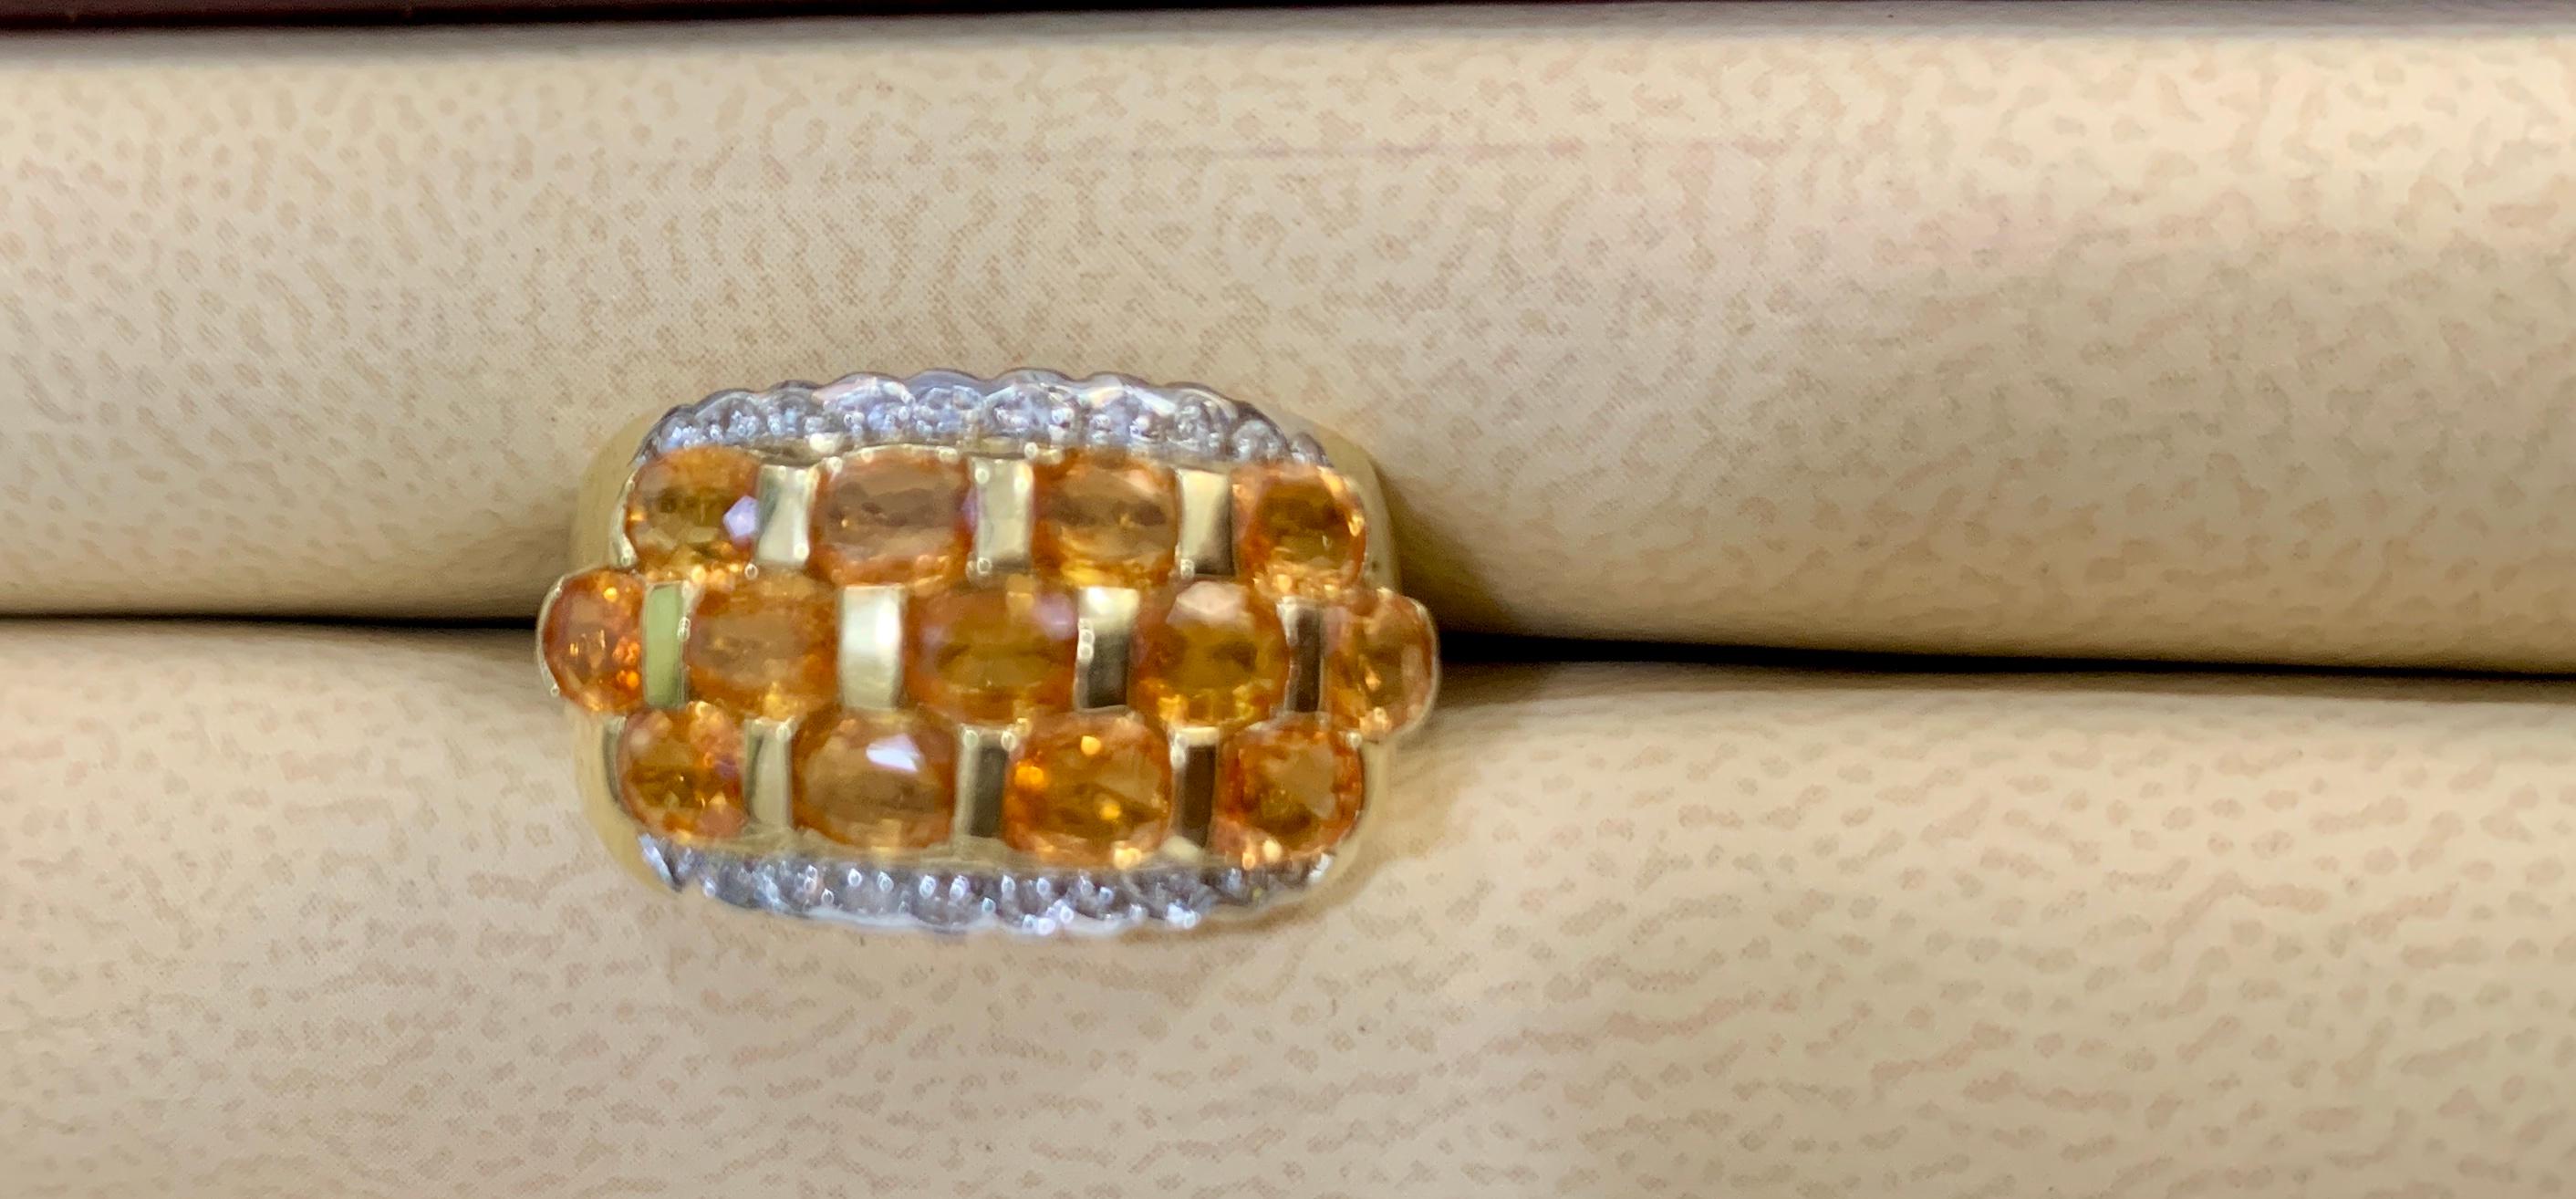 2.25 Carat Oval Cut Natural Yellow Sapphire and Diamond 14 Karat Gold Ring For Sale 7